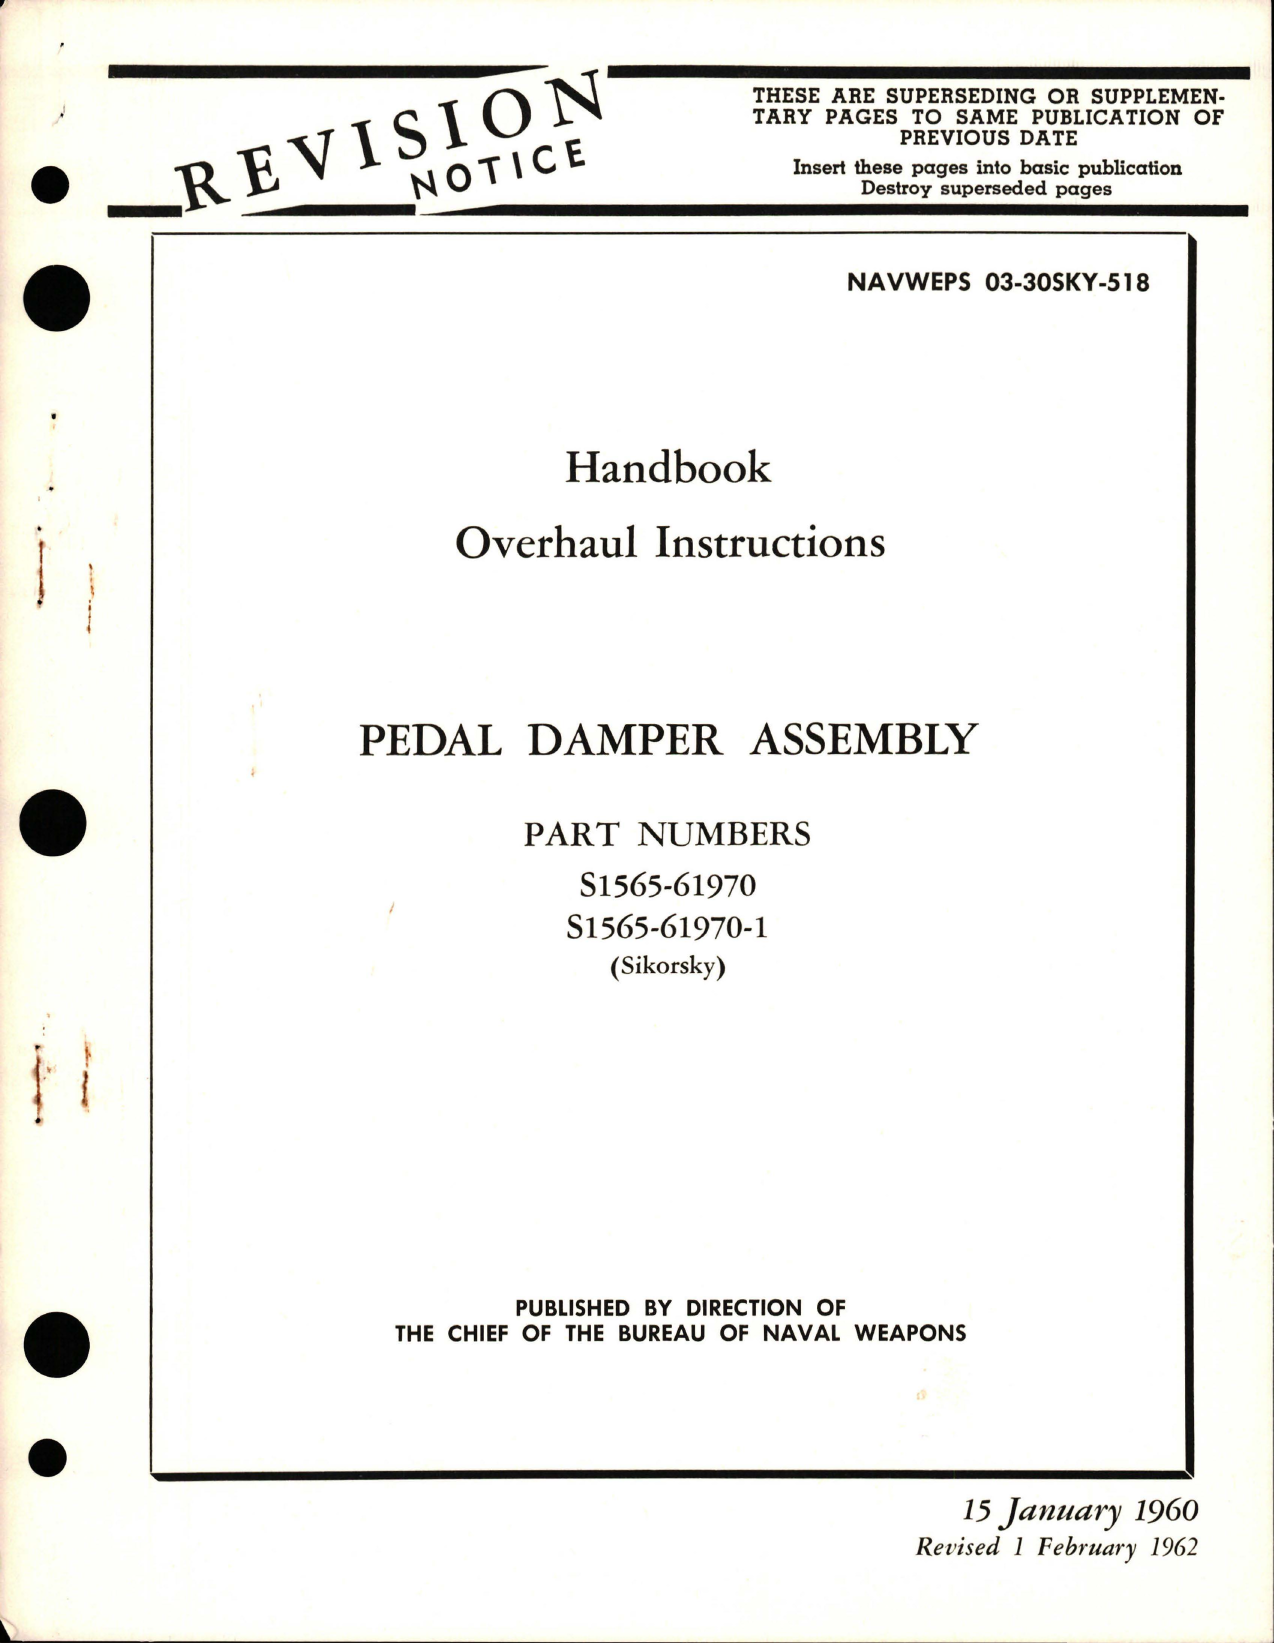 Sample page 1 from AirCorps Library document: Overhaul Instructions for Pedal Damper Assembly - Part S1565-61970 and S1565-61970-1